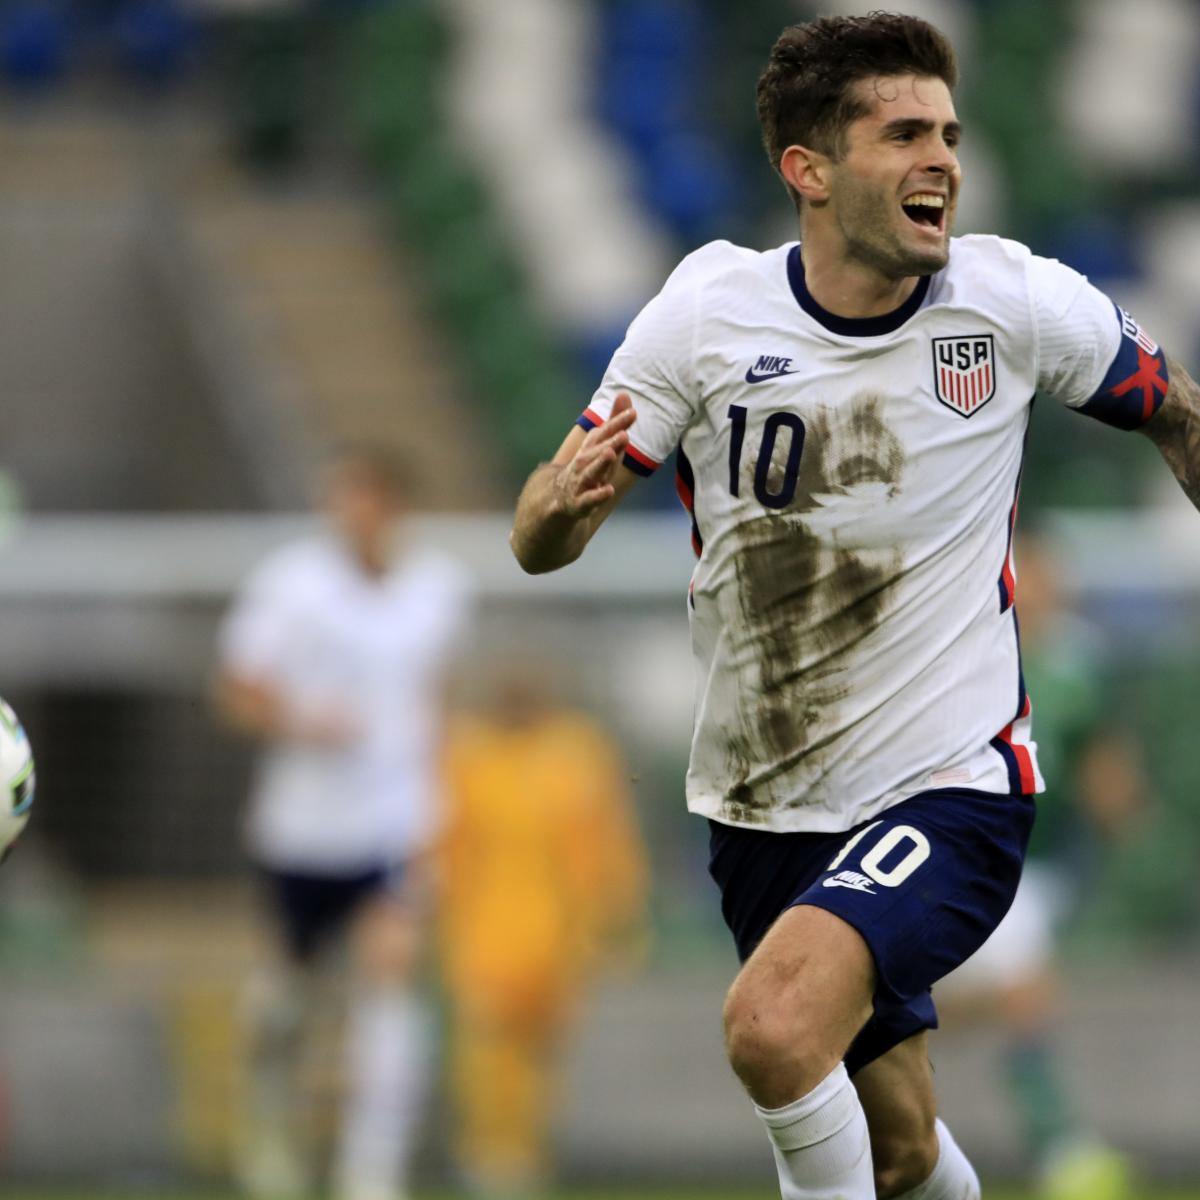 Christian Pulisic, Gio Reyna Win as USMNT Beat Northern Ireland in Pleasant